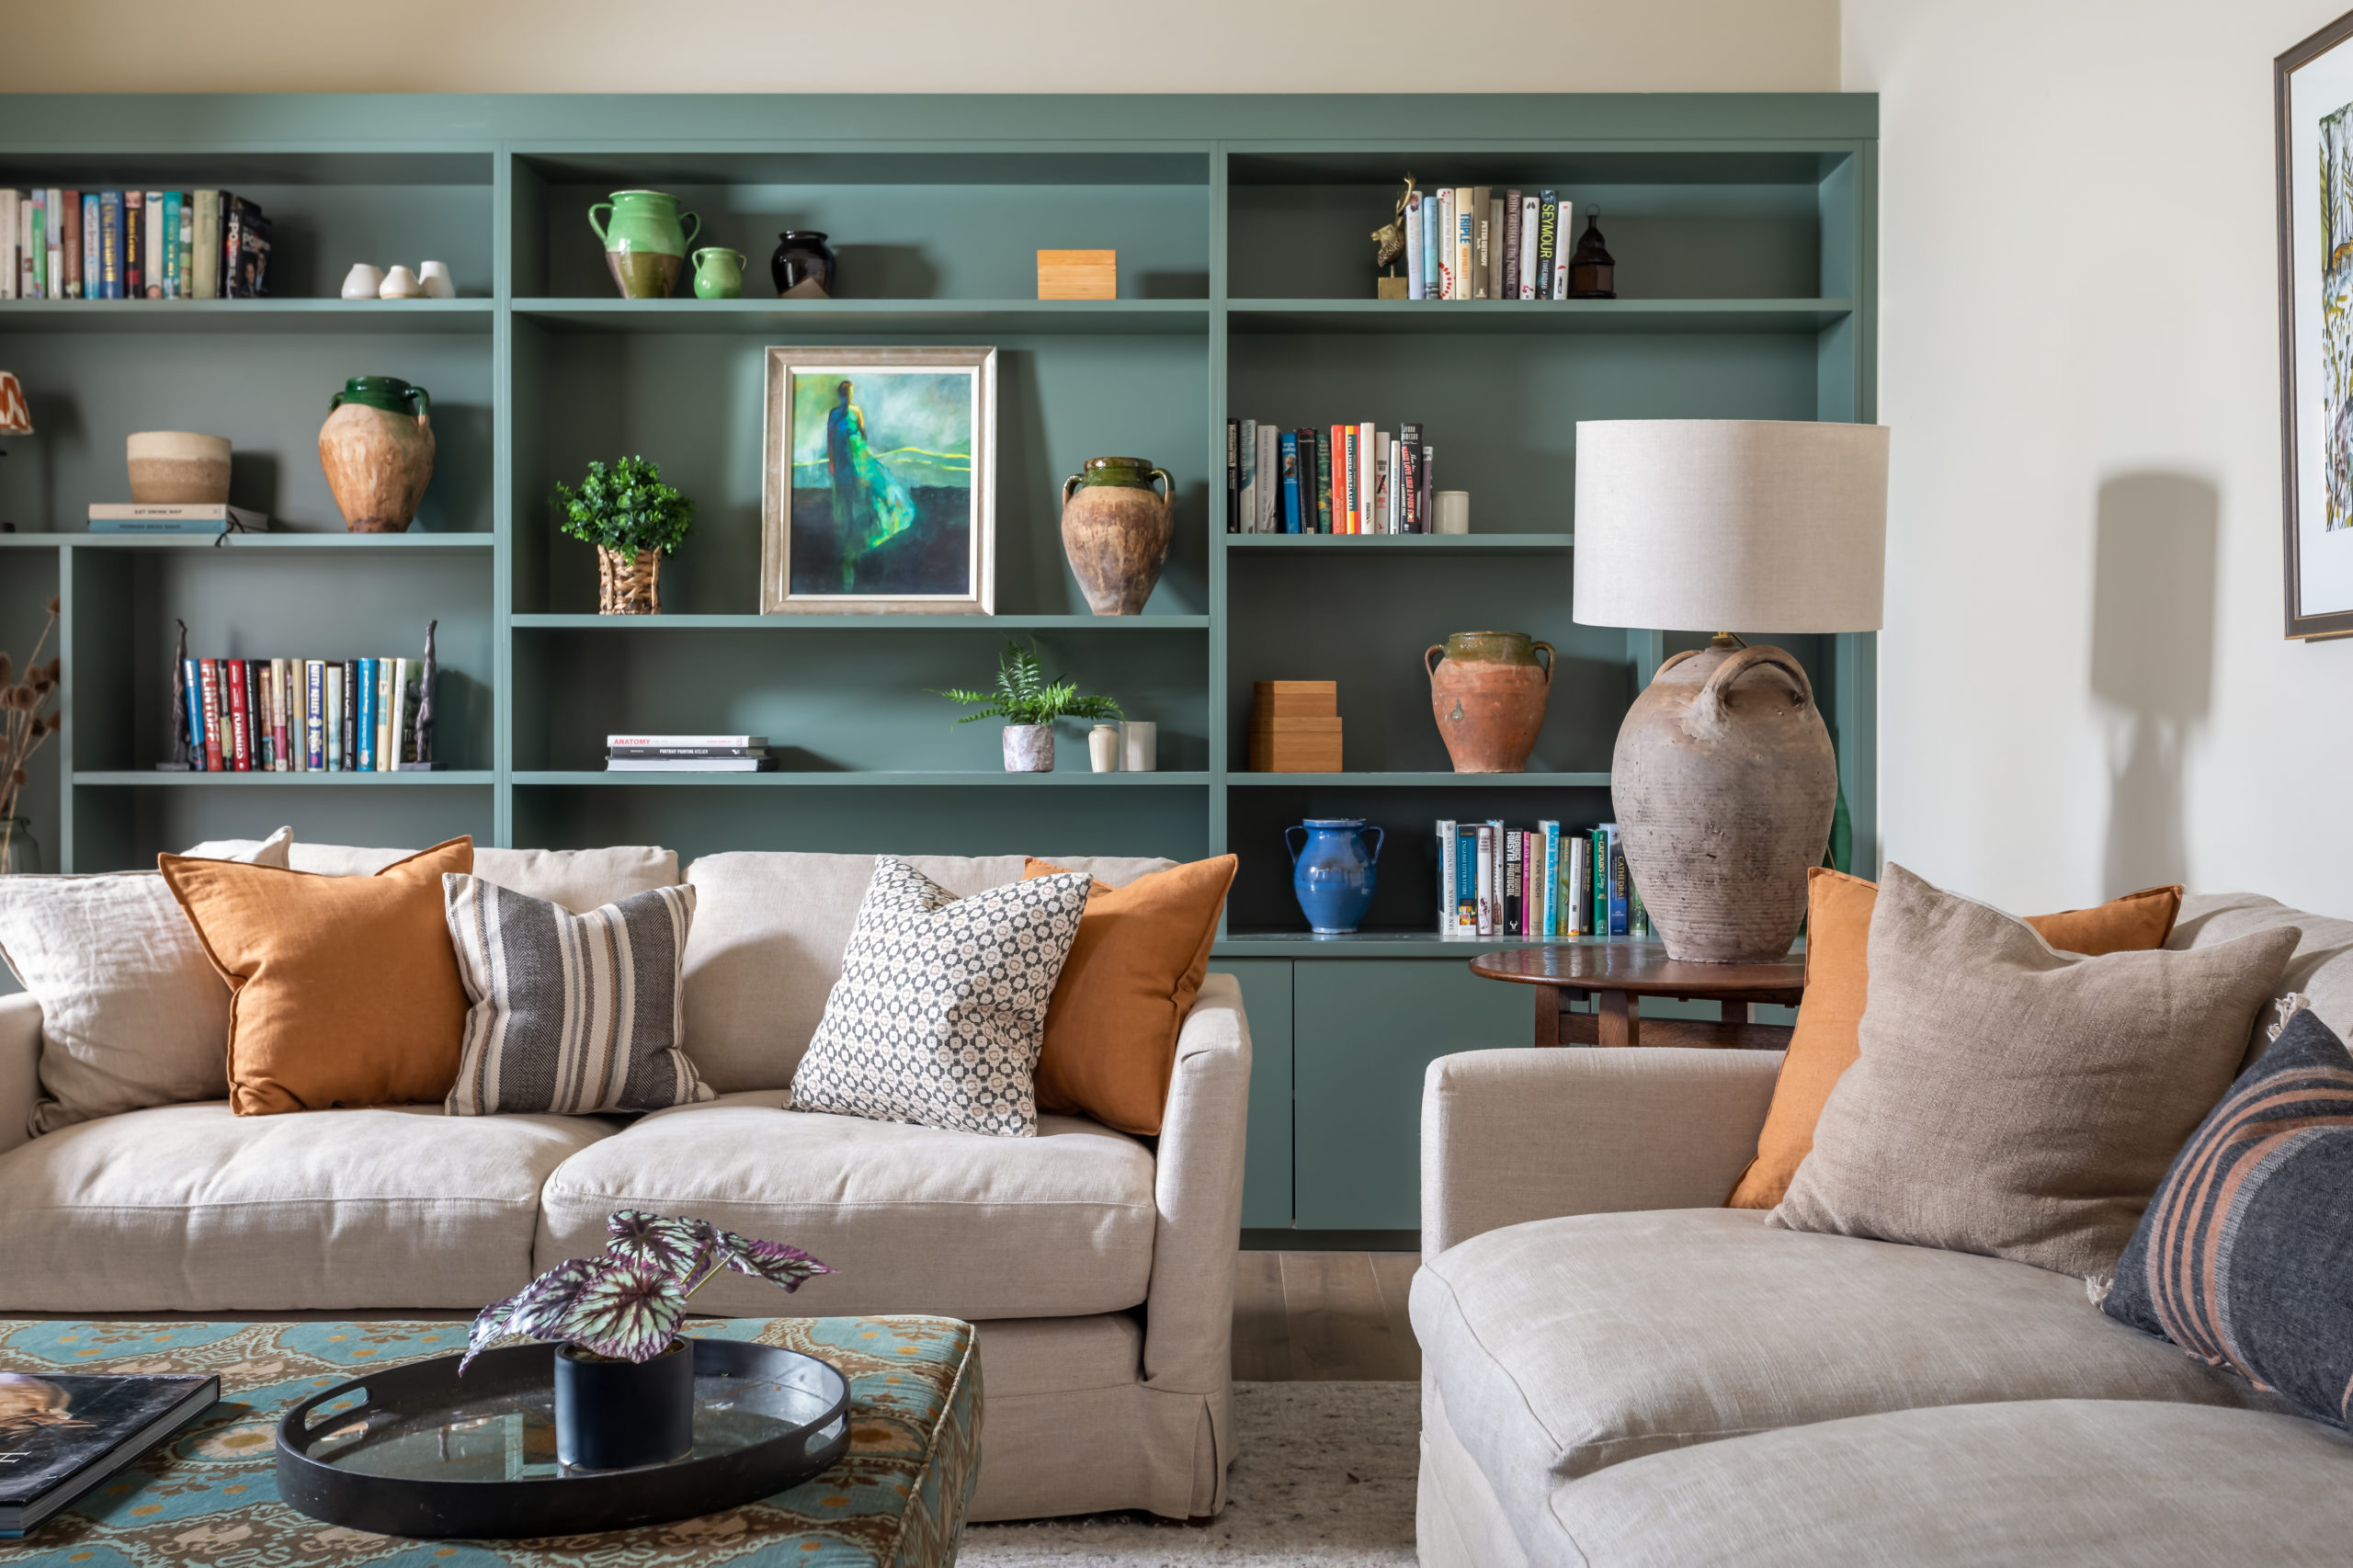 Bespoke bookcase painted green smoke. Neutral sofas and large patterned footstool.